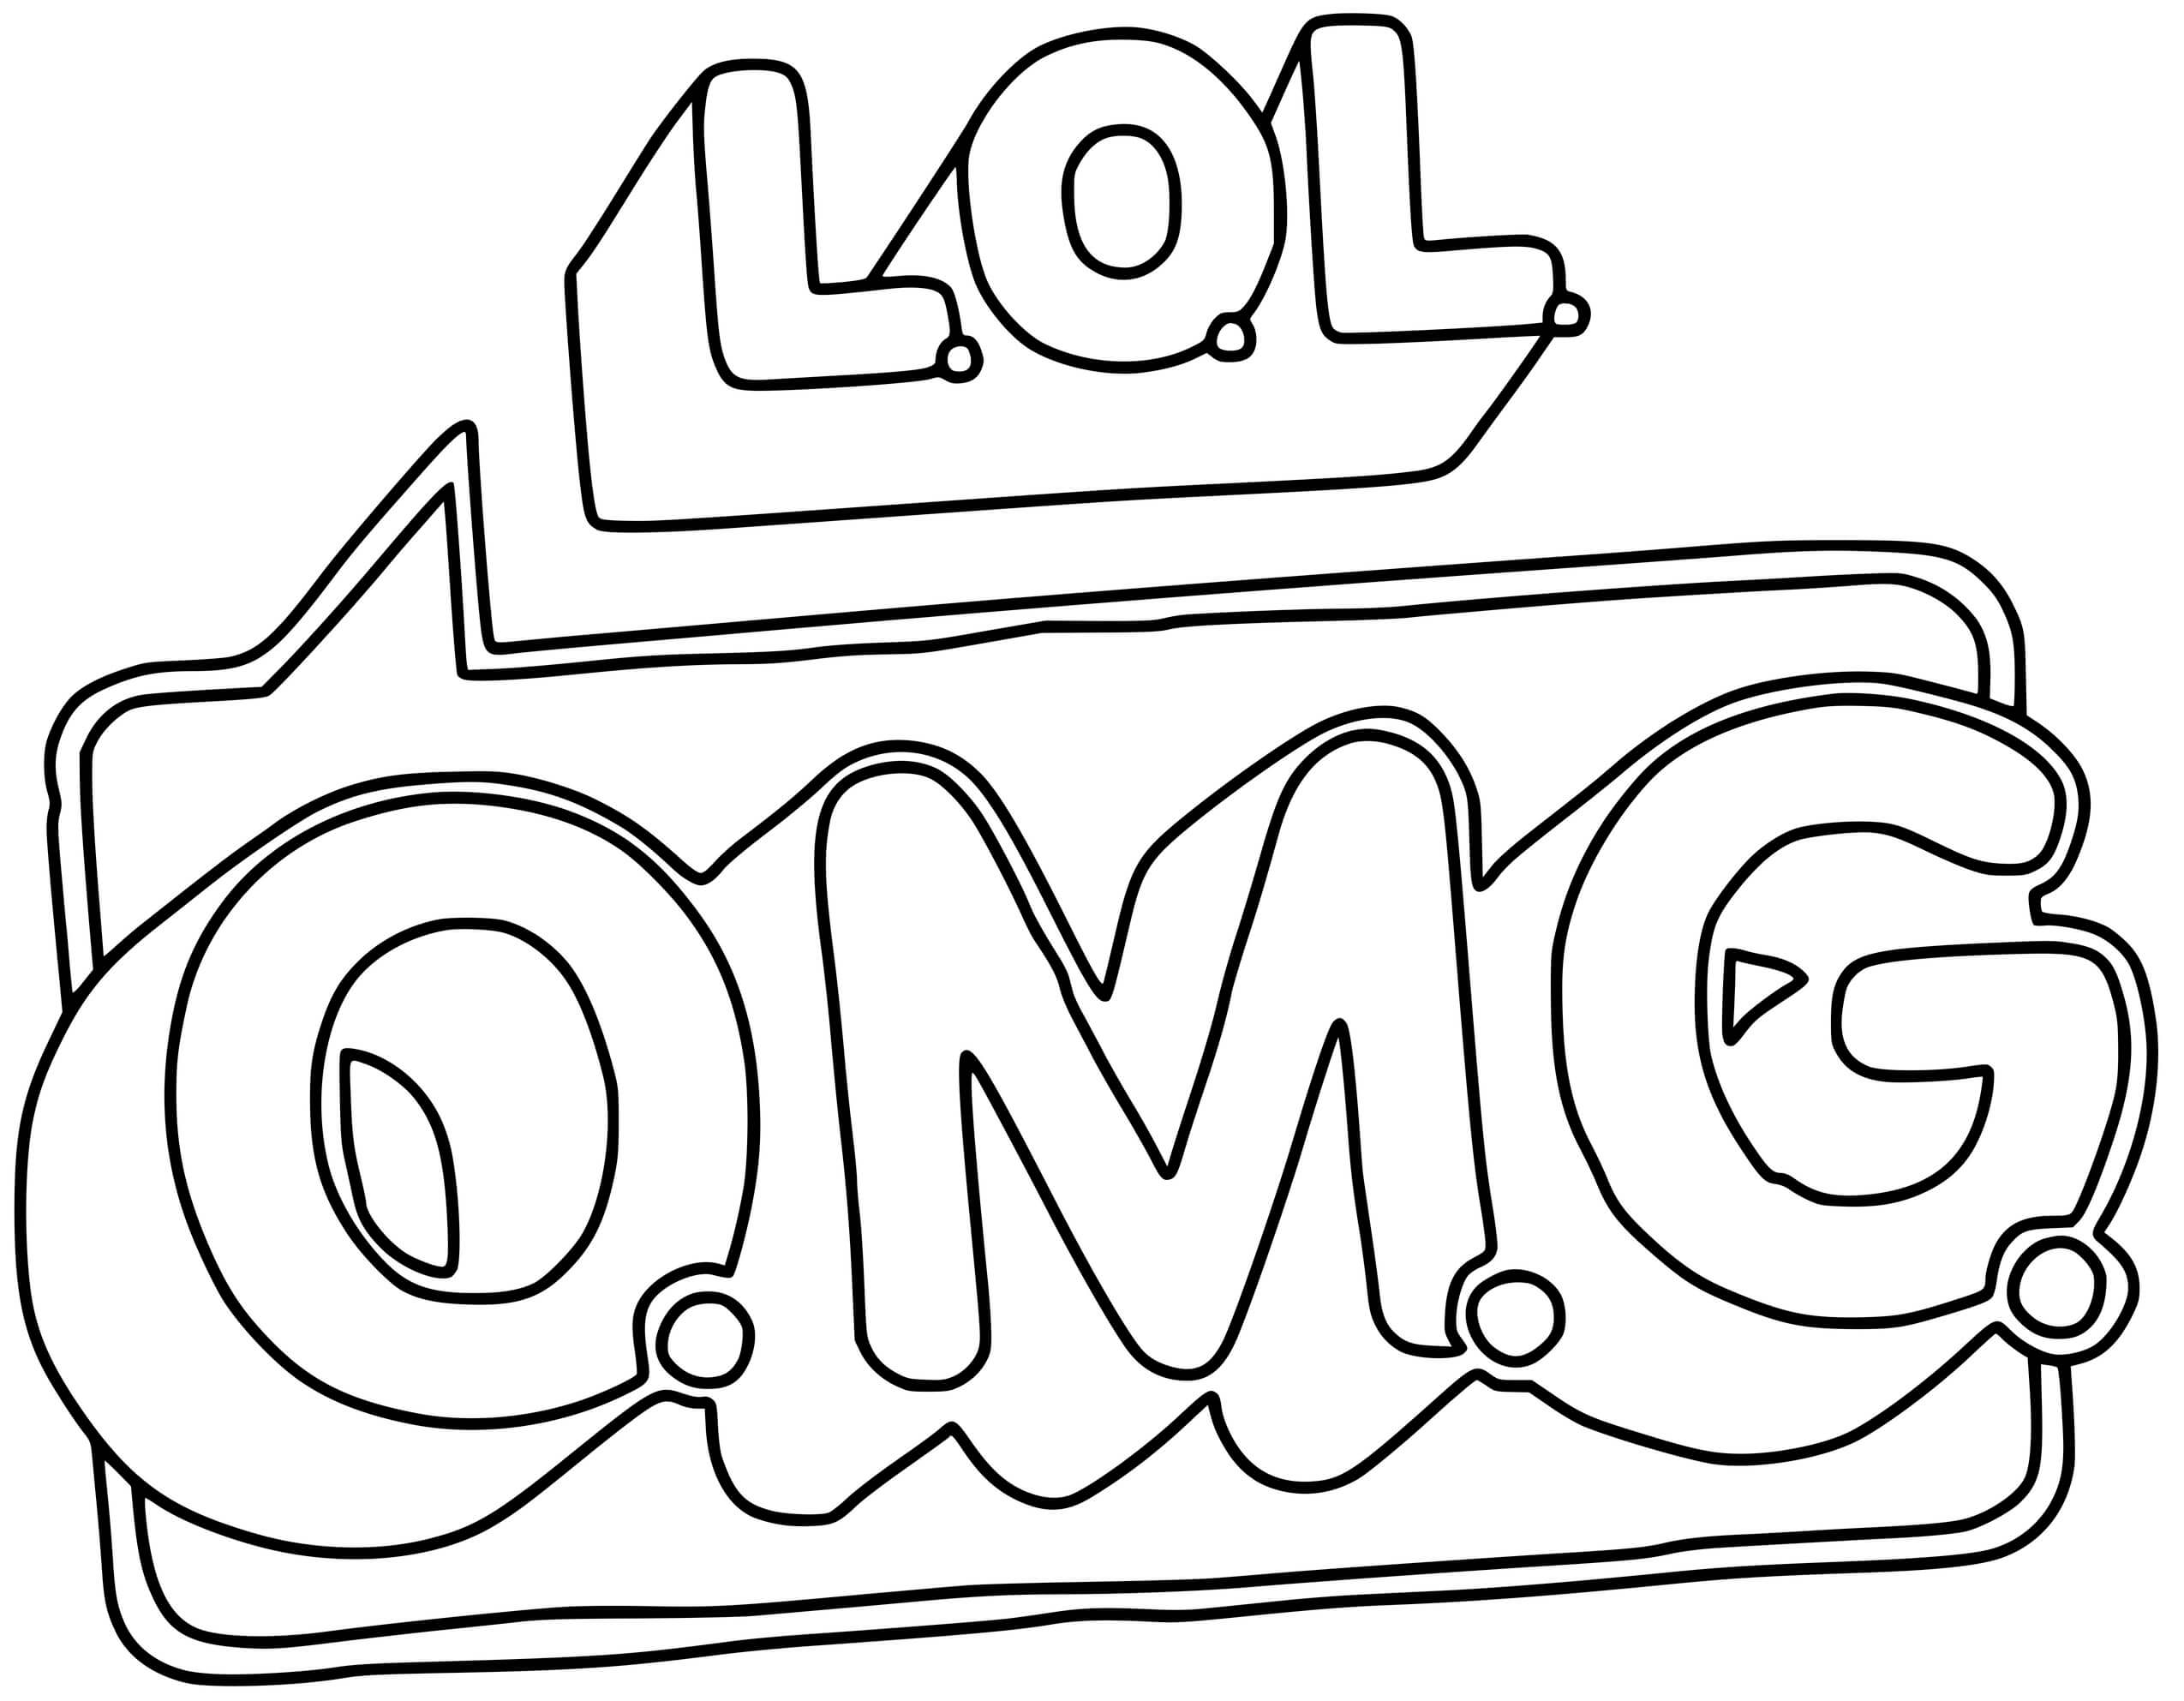 LOL OMG Logo Coloring Page